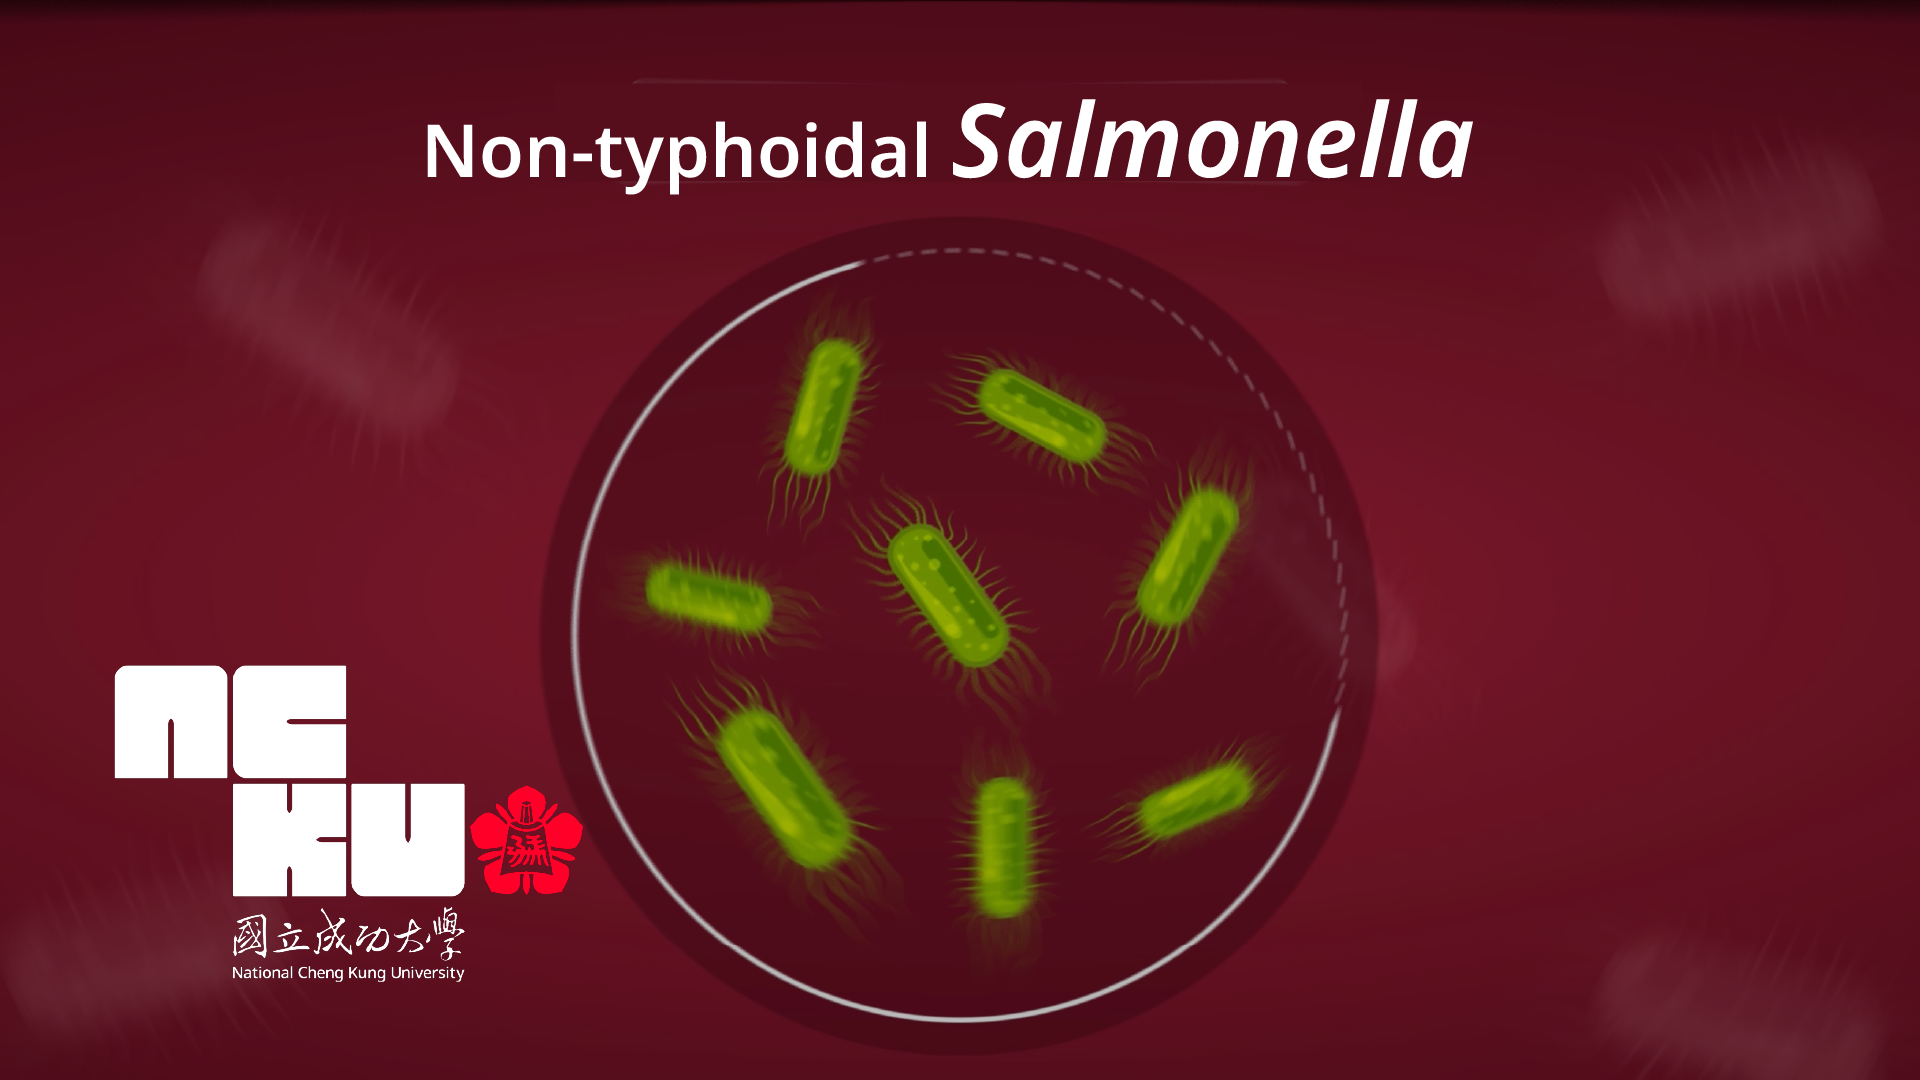 Risk of Non-typhoidal Salmonella Vascular Infection Increases with Atherosclerosis